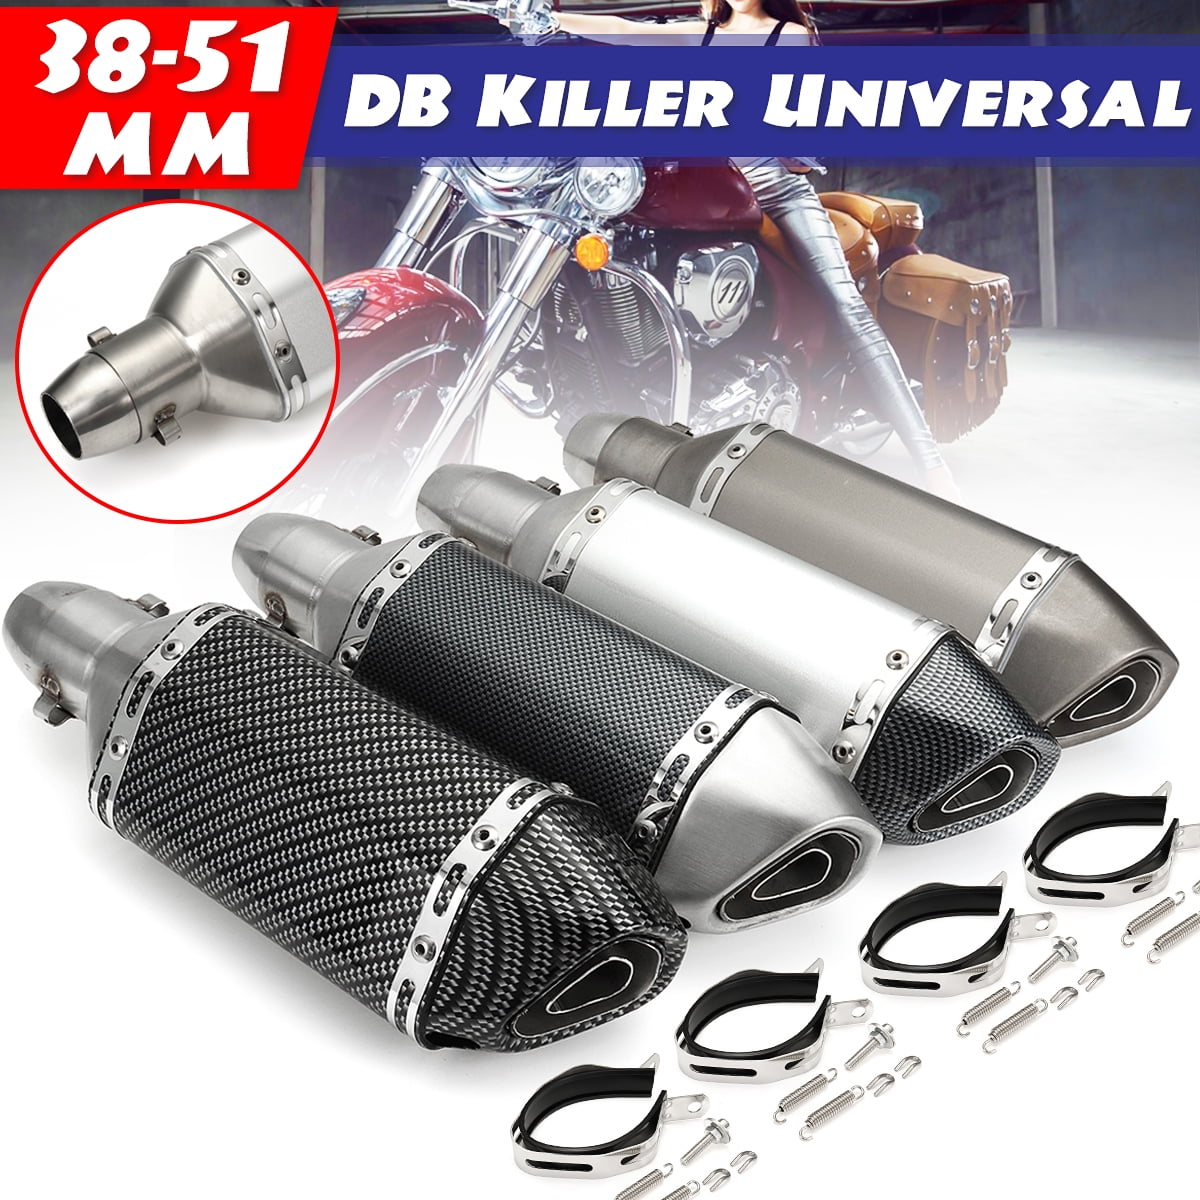 Universal Motorbike Exhaust Pipe Tips Stainless Steel Noise Eliminator Silencer Scooter Dirt Bike Muffler Pipe Motorcycle Exhaust Pipe Muffler Silencer Type 1 